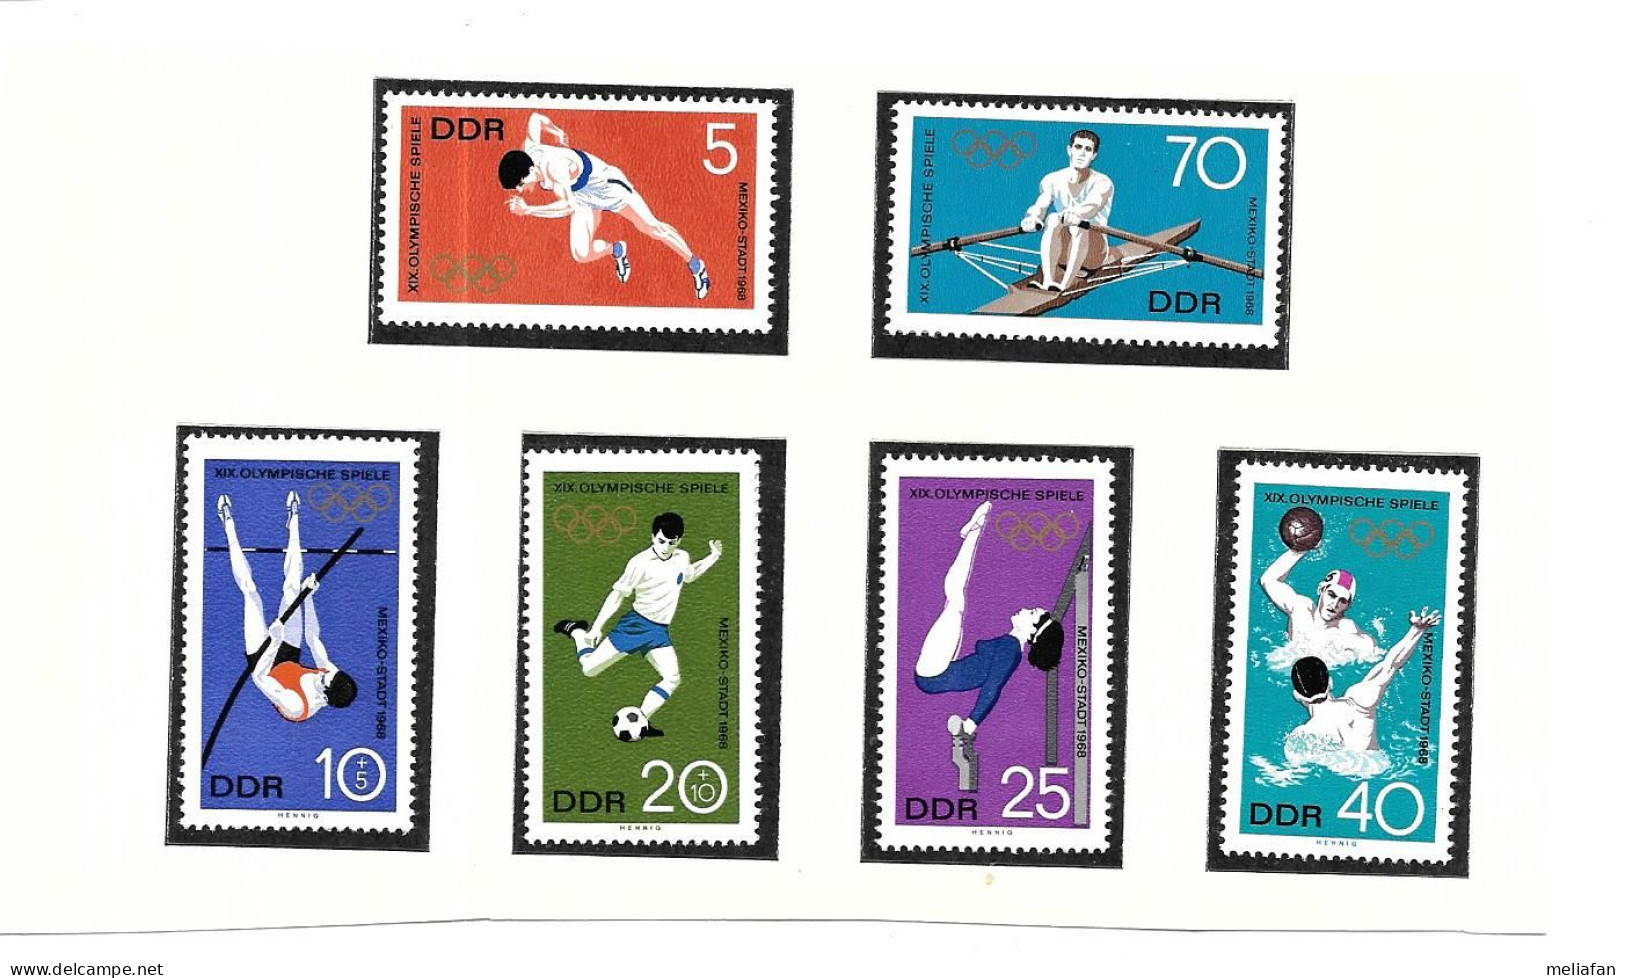 DF96 - TIMBRES POSTE DDR - JEUX OLYMPIQUES MEXICO - AVIRON - FOOTBALL - WATER POLO - GYMNASTIQUE - ATHLETISME - Sommer 1968: Mexico